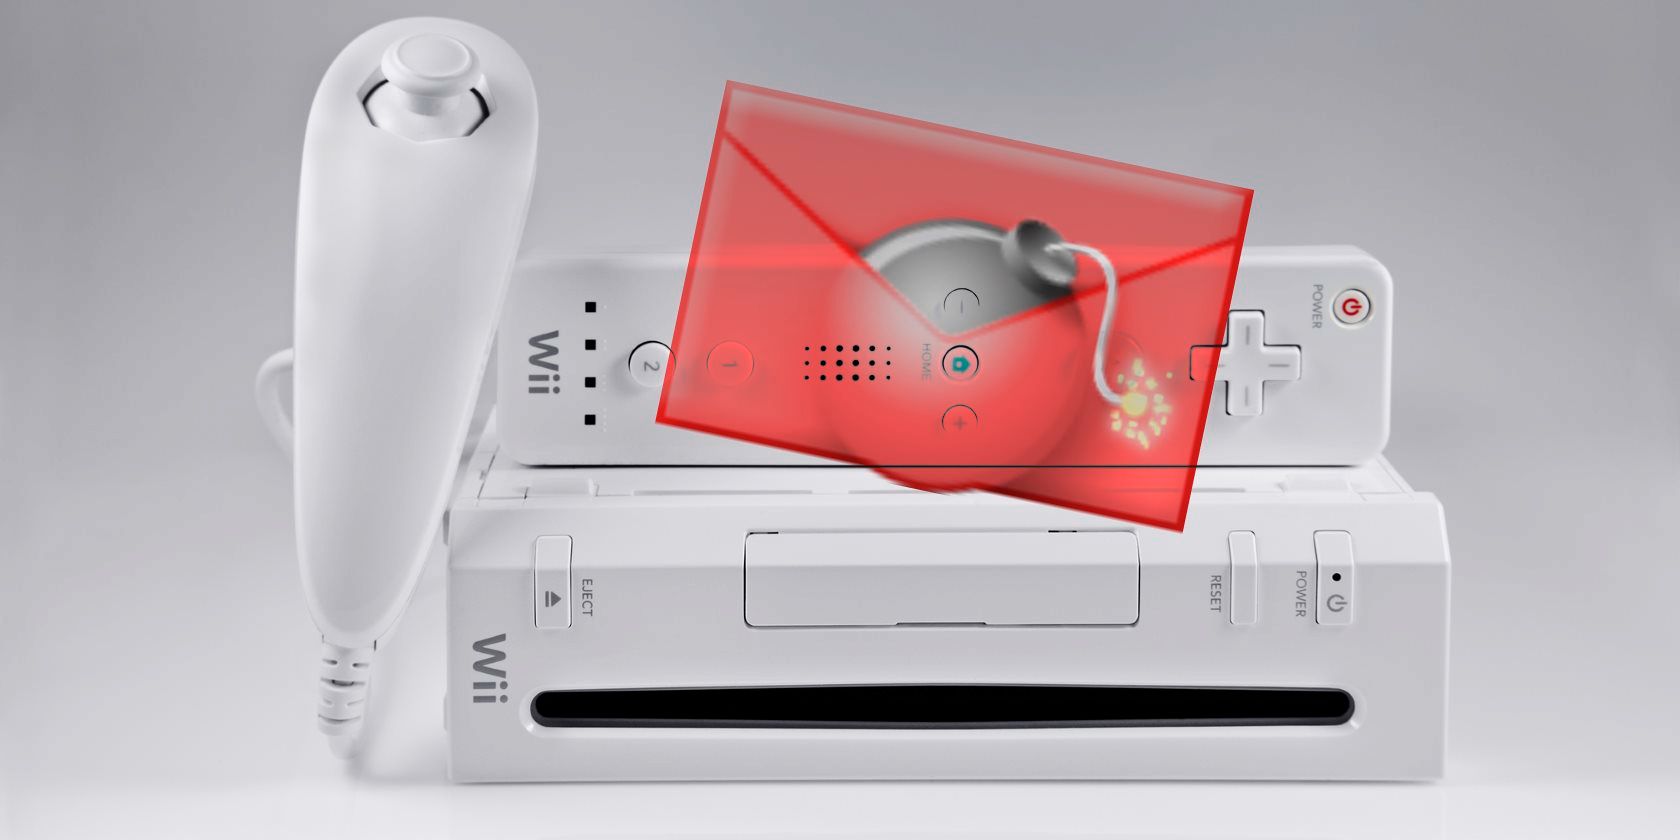 how to install homebrew channel on wii u